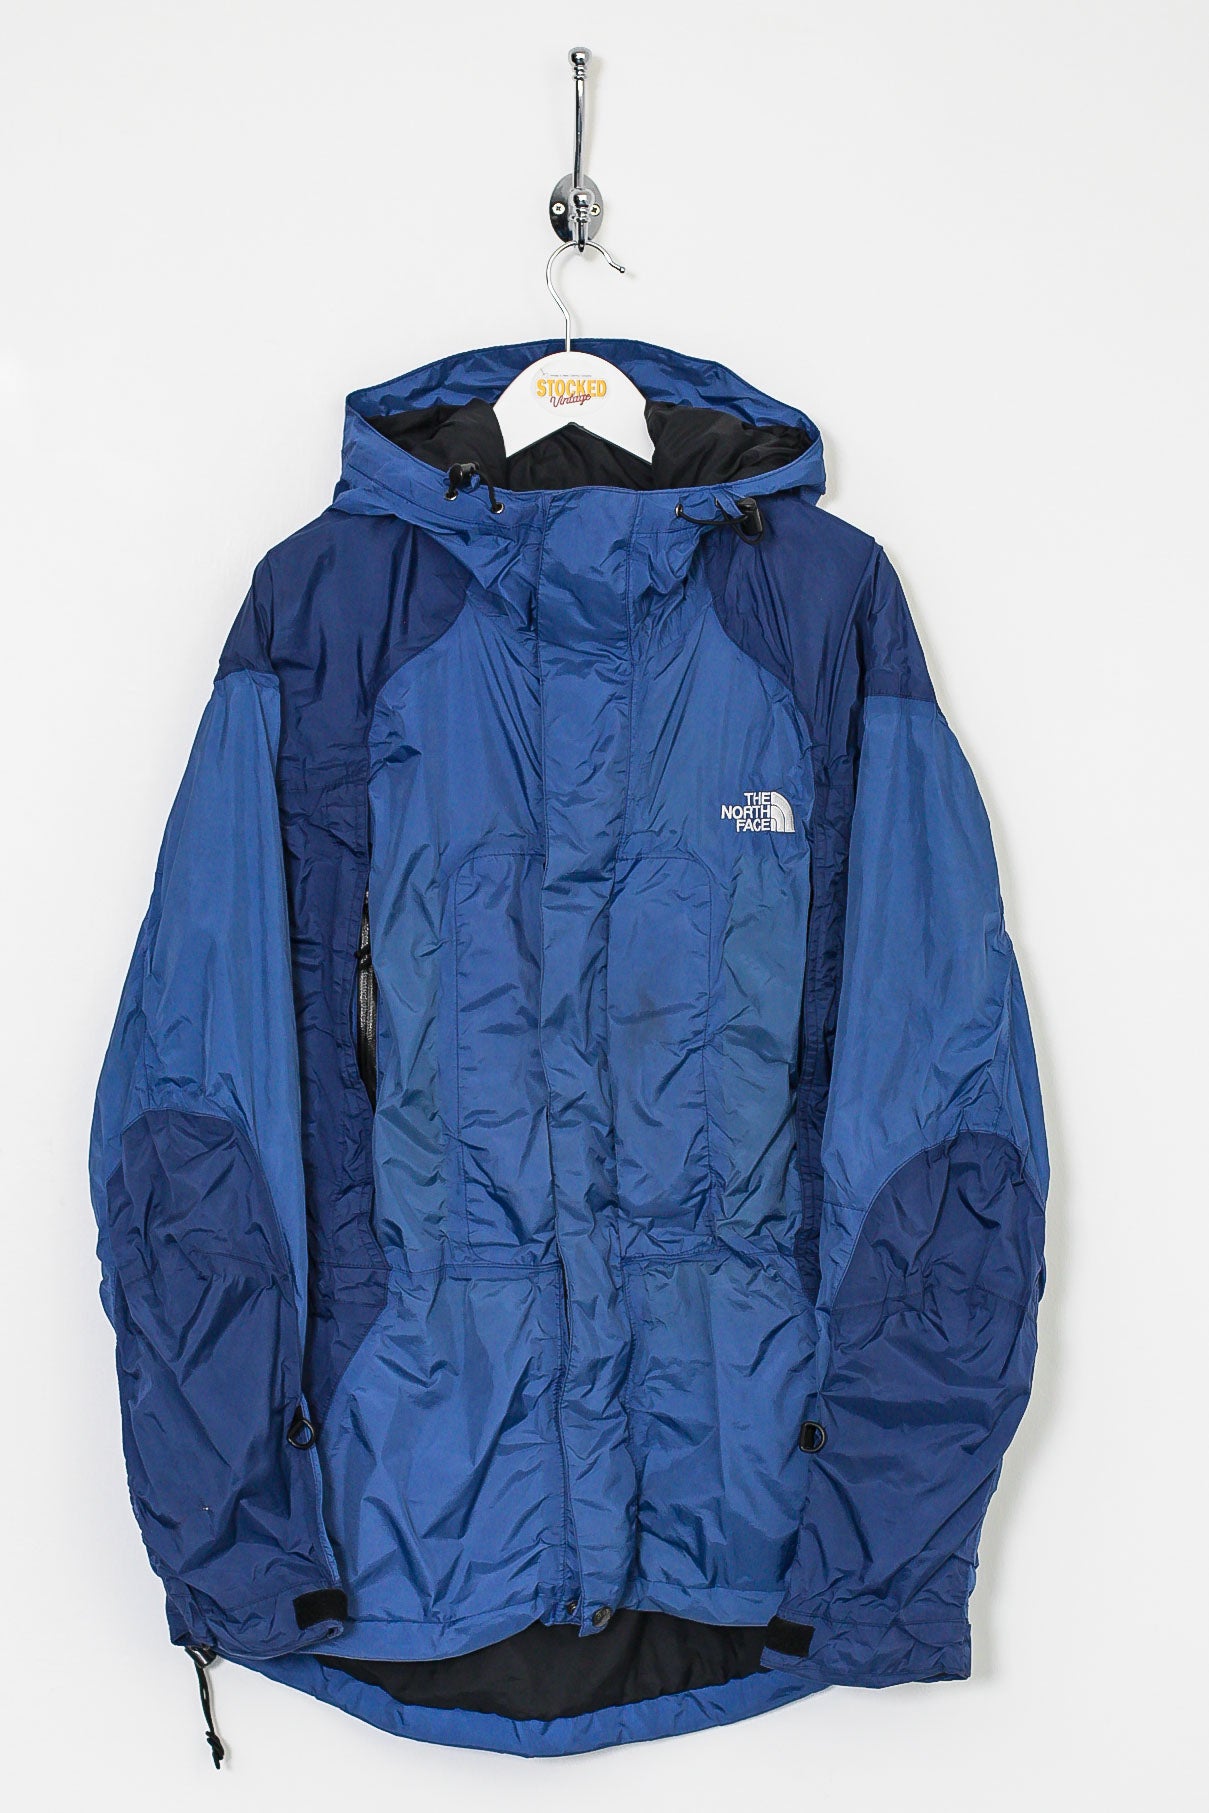 The North Face Gore-Tex Jacket (M) – Stocked Vintage